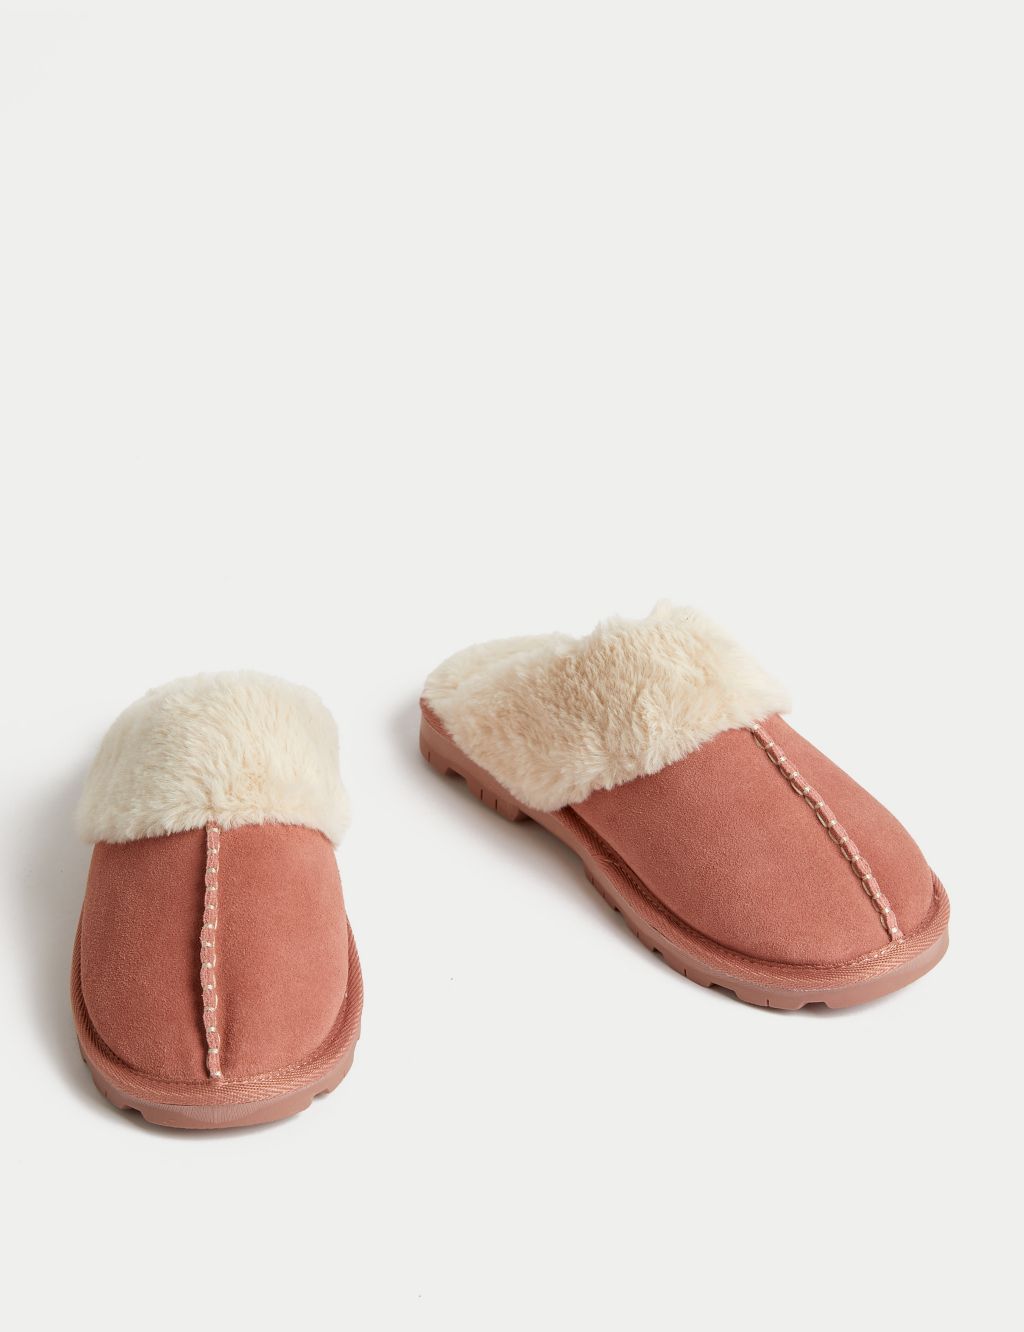 Suede Faux Fur Lined Mule Slippers image 2